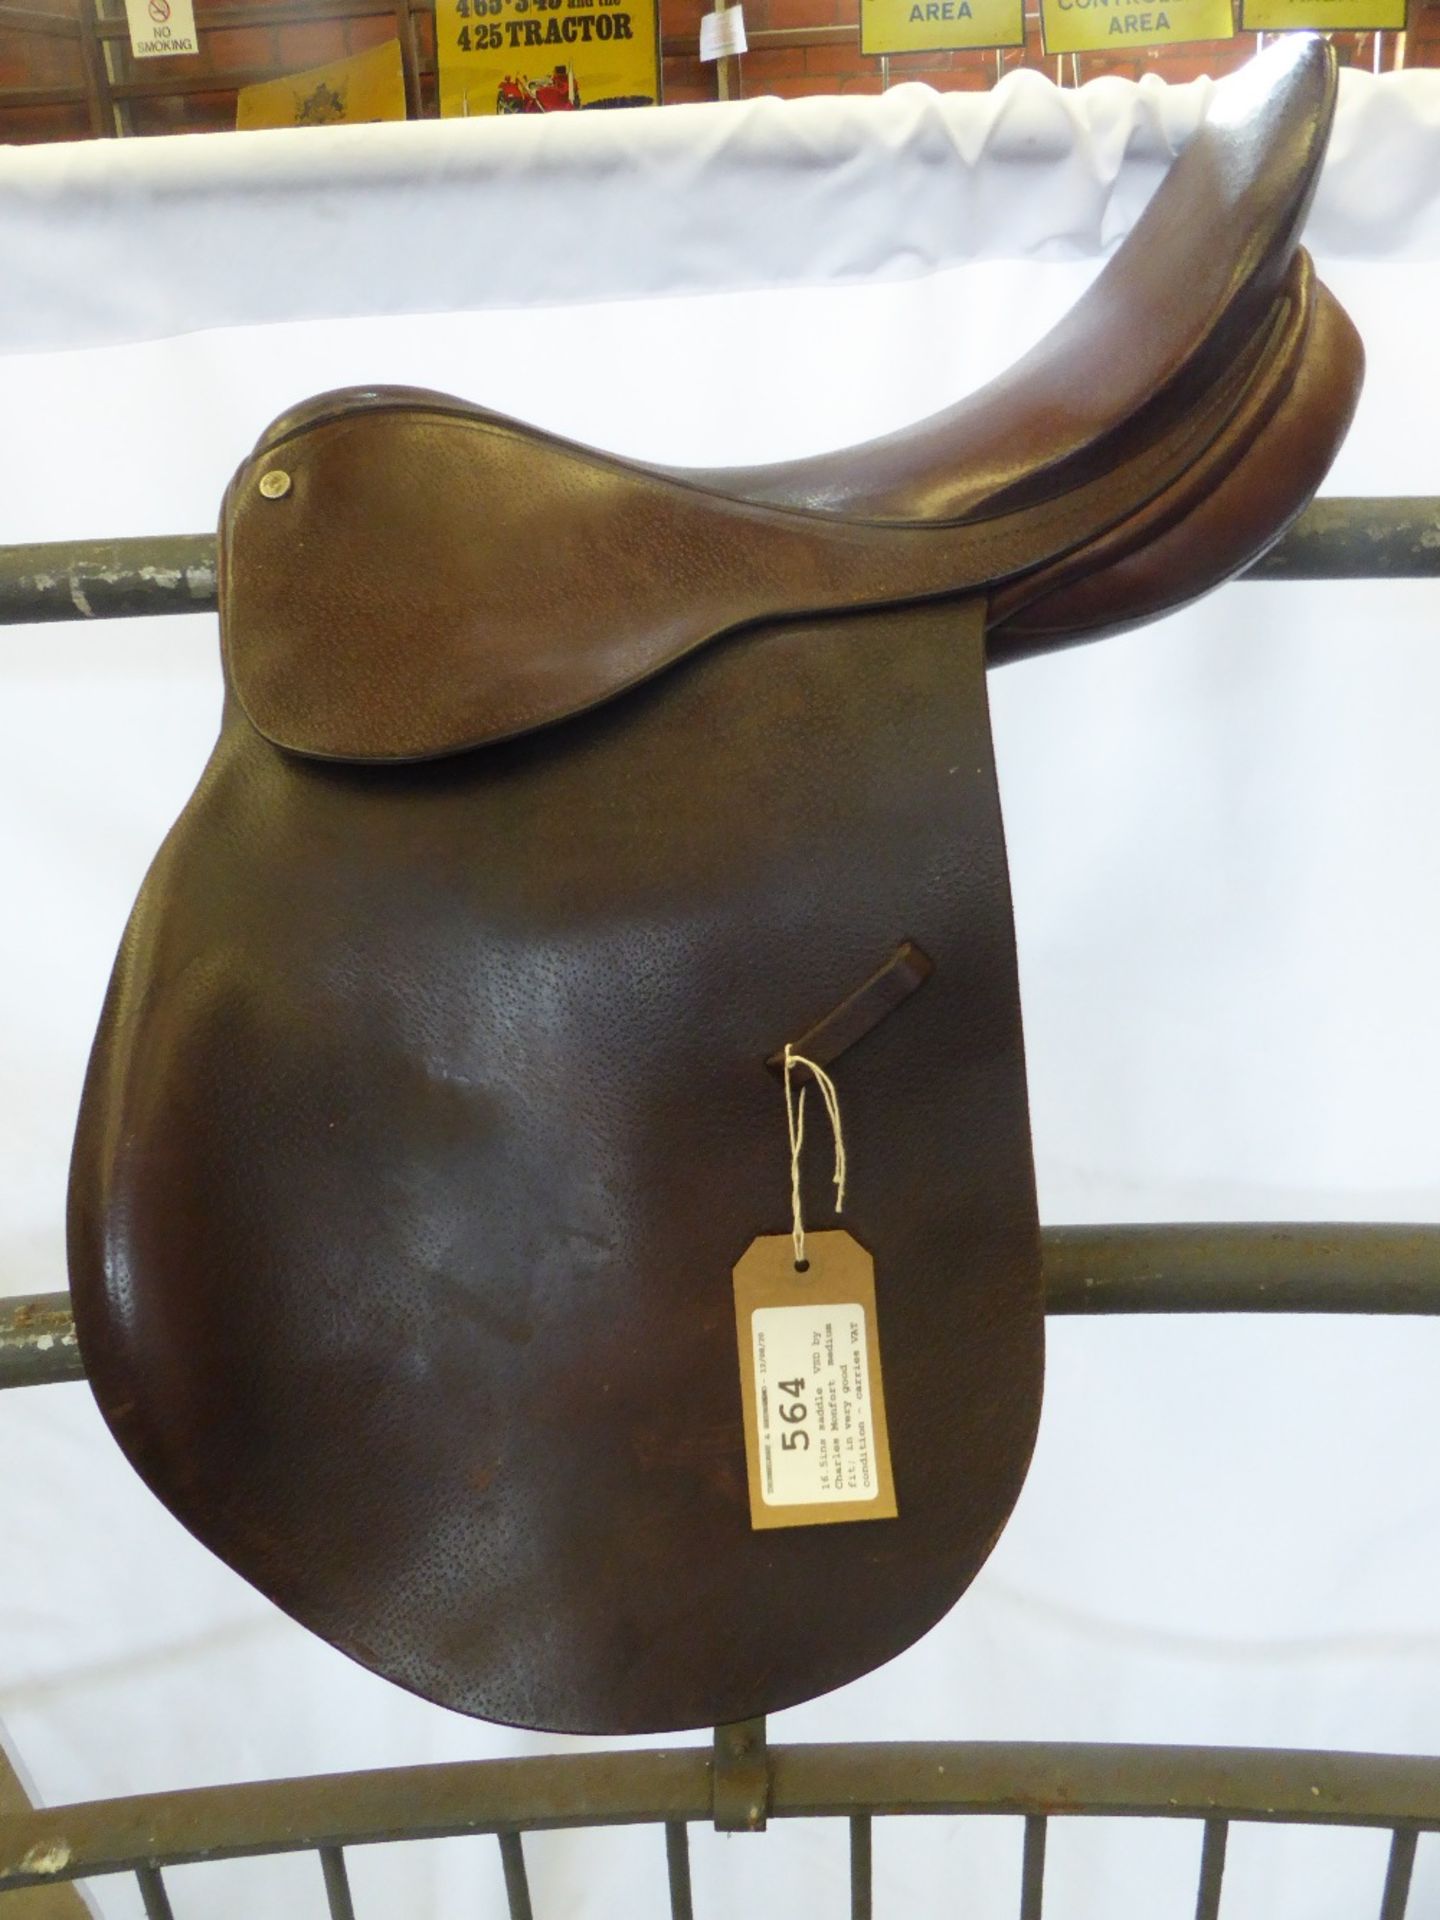 16.5ins saddle, VSD by Charles Monfort, medium fit; in very good condition - carries VAT